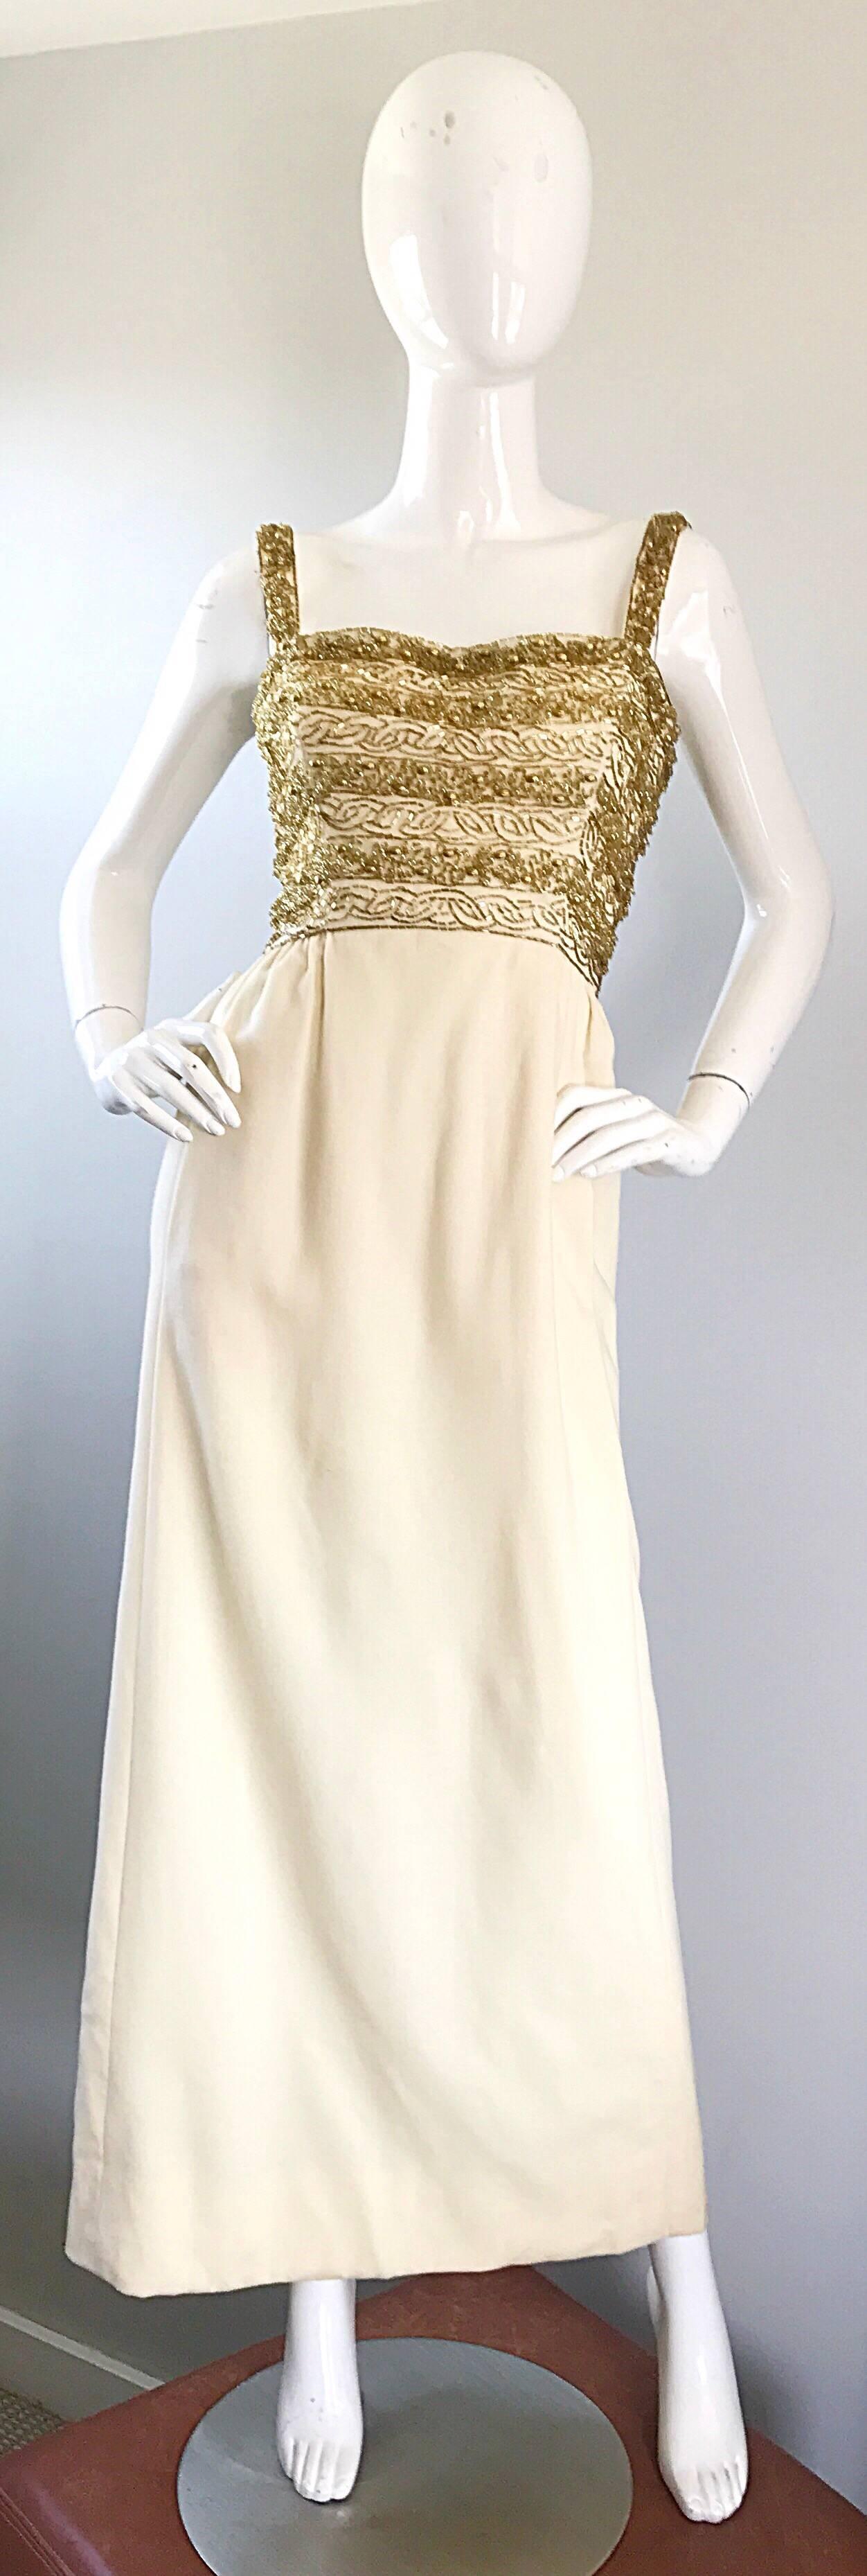 Gorgeous 1960s JOSEPH MAGNIN ivory / winter white and gold beaded couture virgin wool full length evening dress! Features thousands of hand-sewn gold beads of all different sizes on the front and back of the fitted bodice. Features POCKETS at each